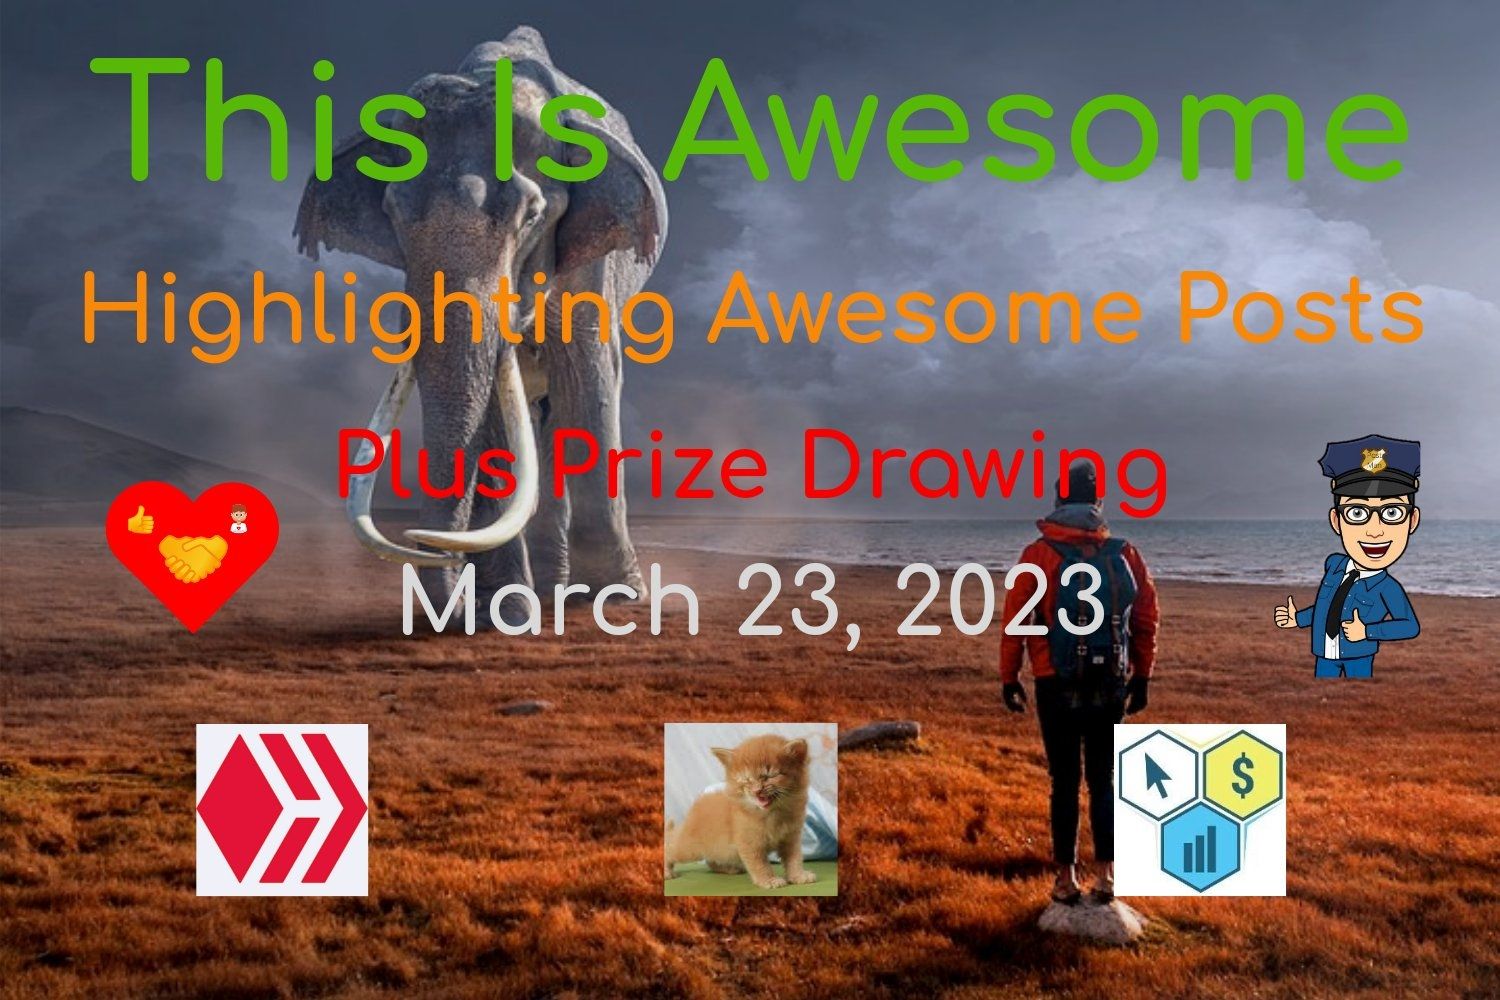 @thisisawesome/this-is-awesome-highlighting-awesome-posts-plus-prize-drawing-march-23-2023